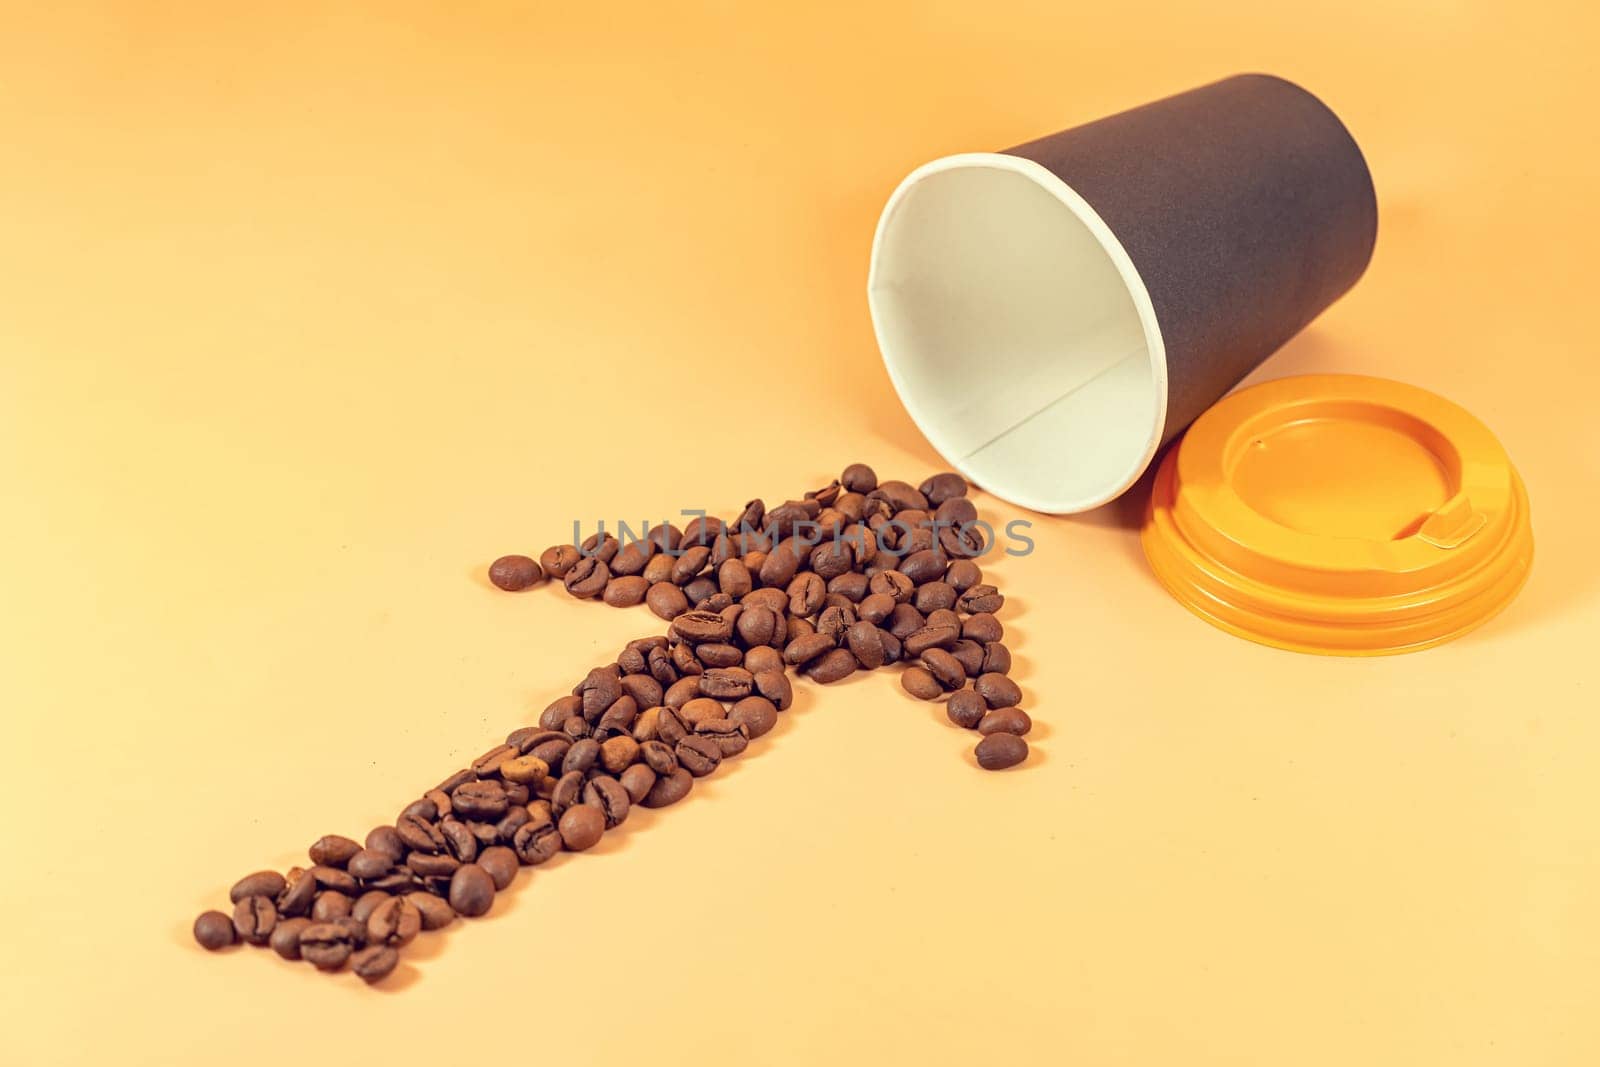 An arrow made of coffee beans points to a disposable paper cup